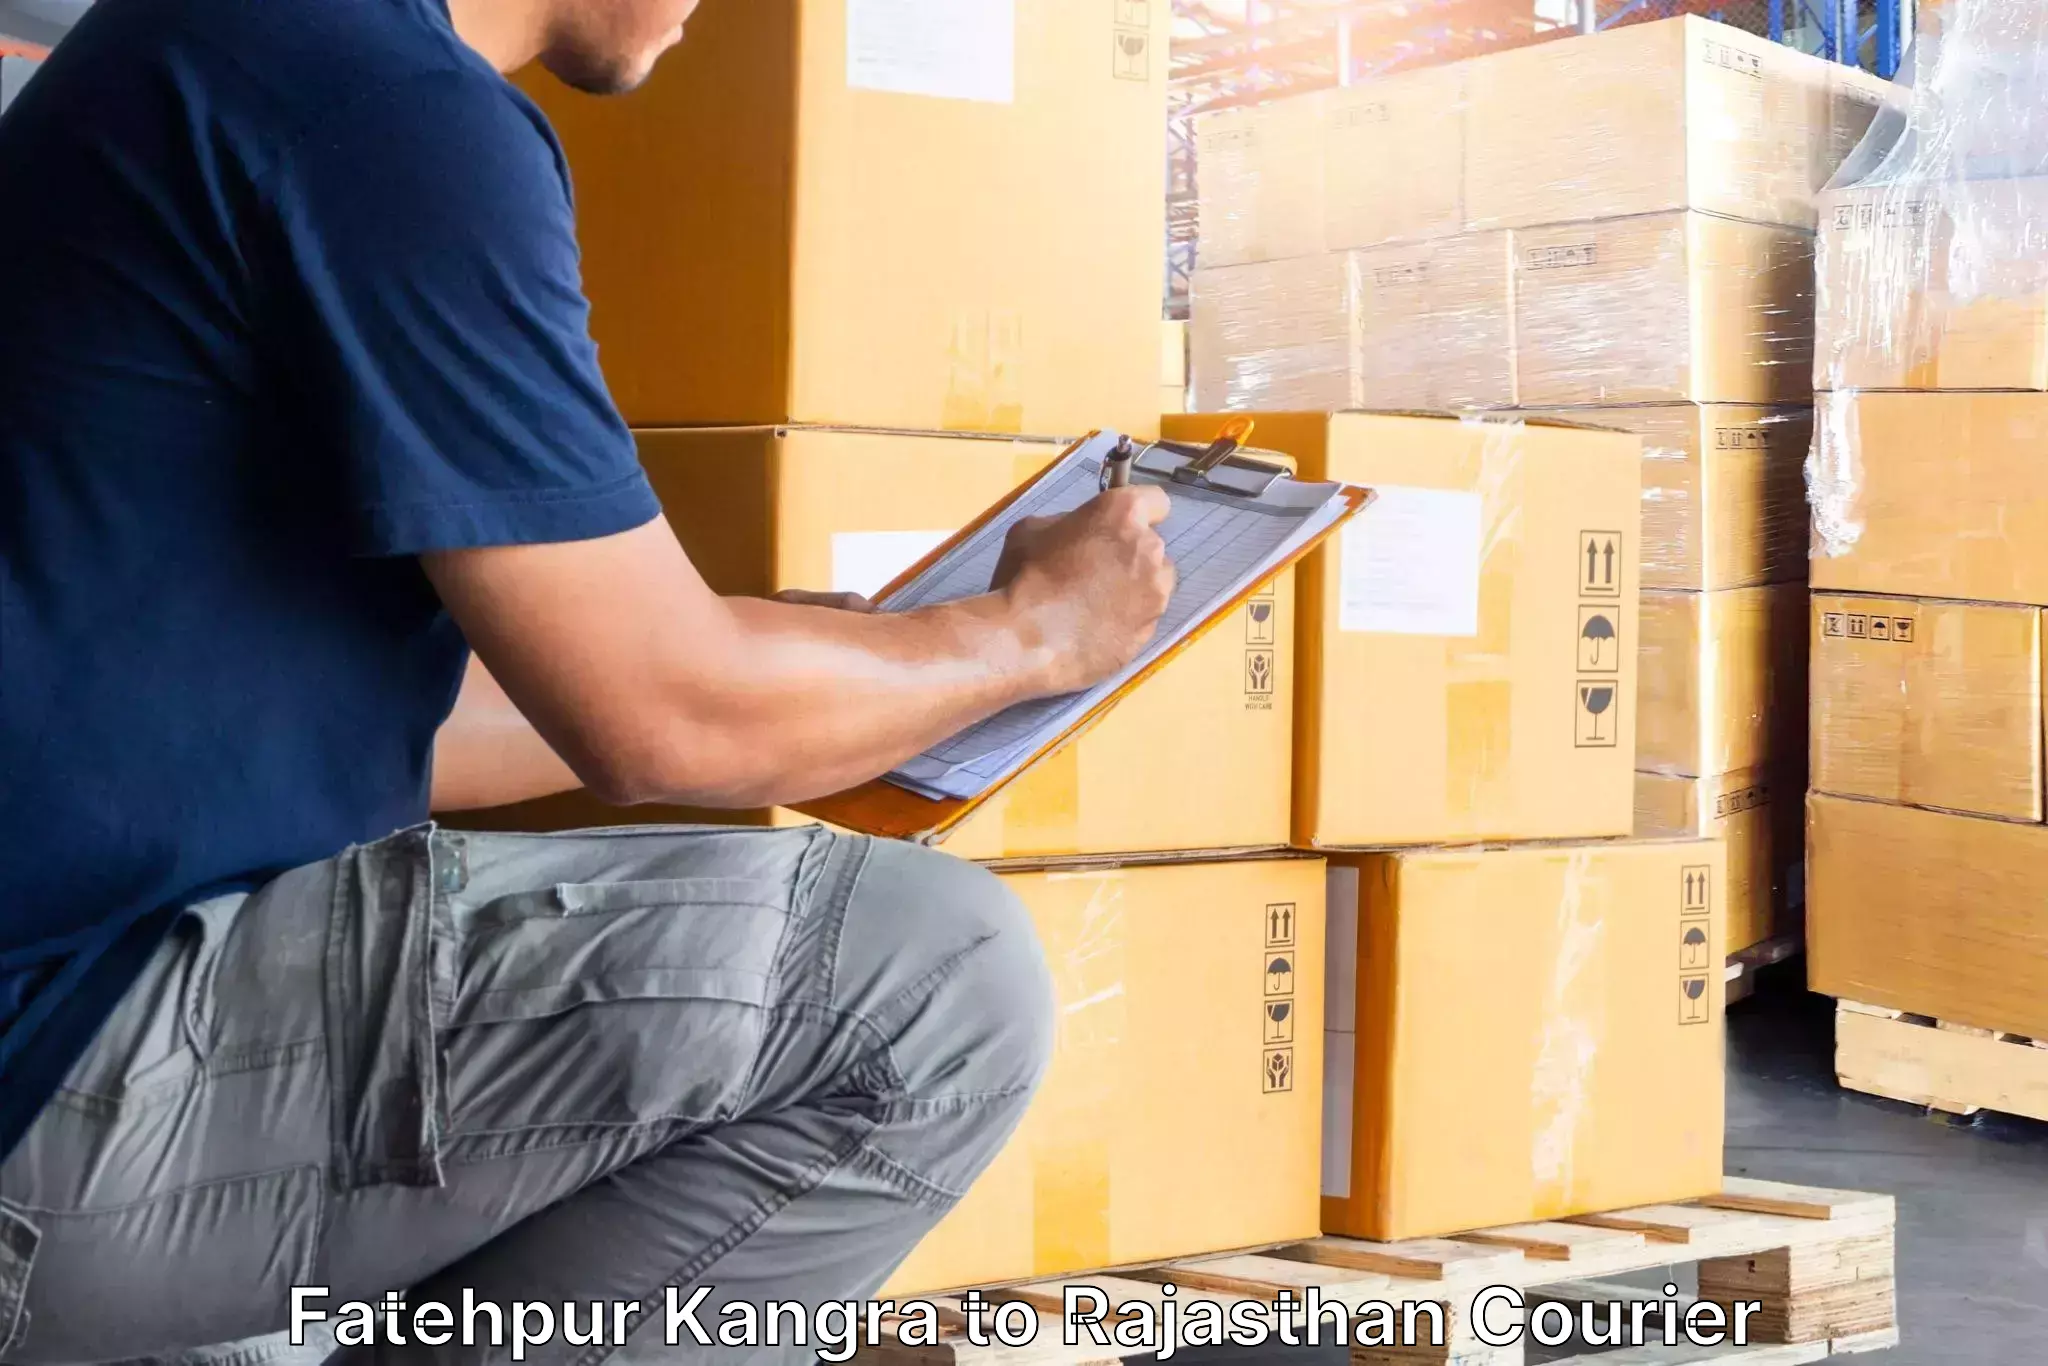 Furniture shipping services in Fatehpur Kangra to Mathania